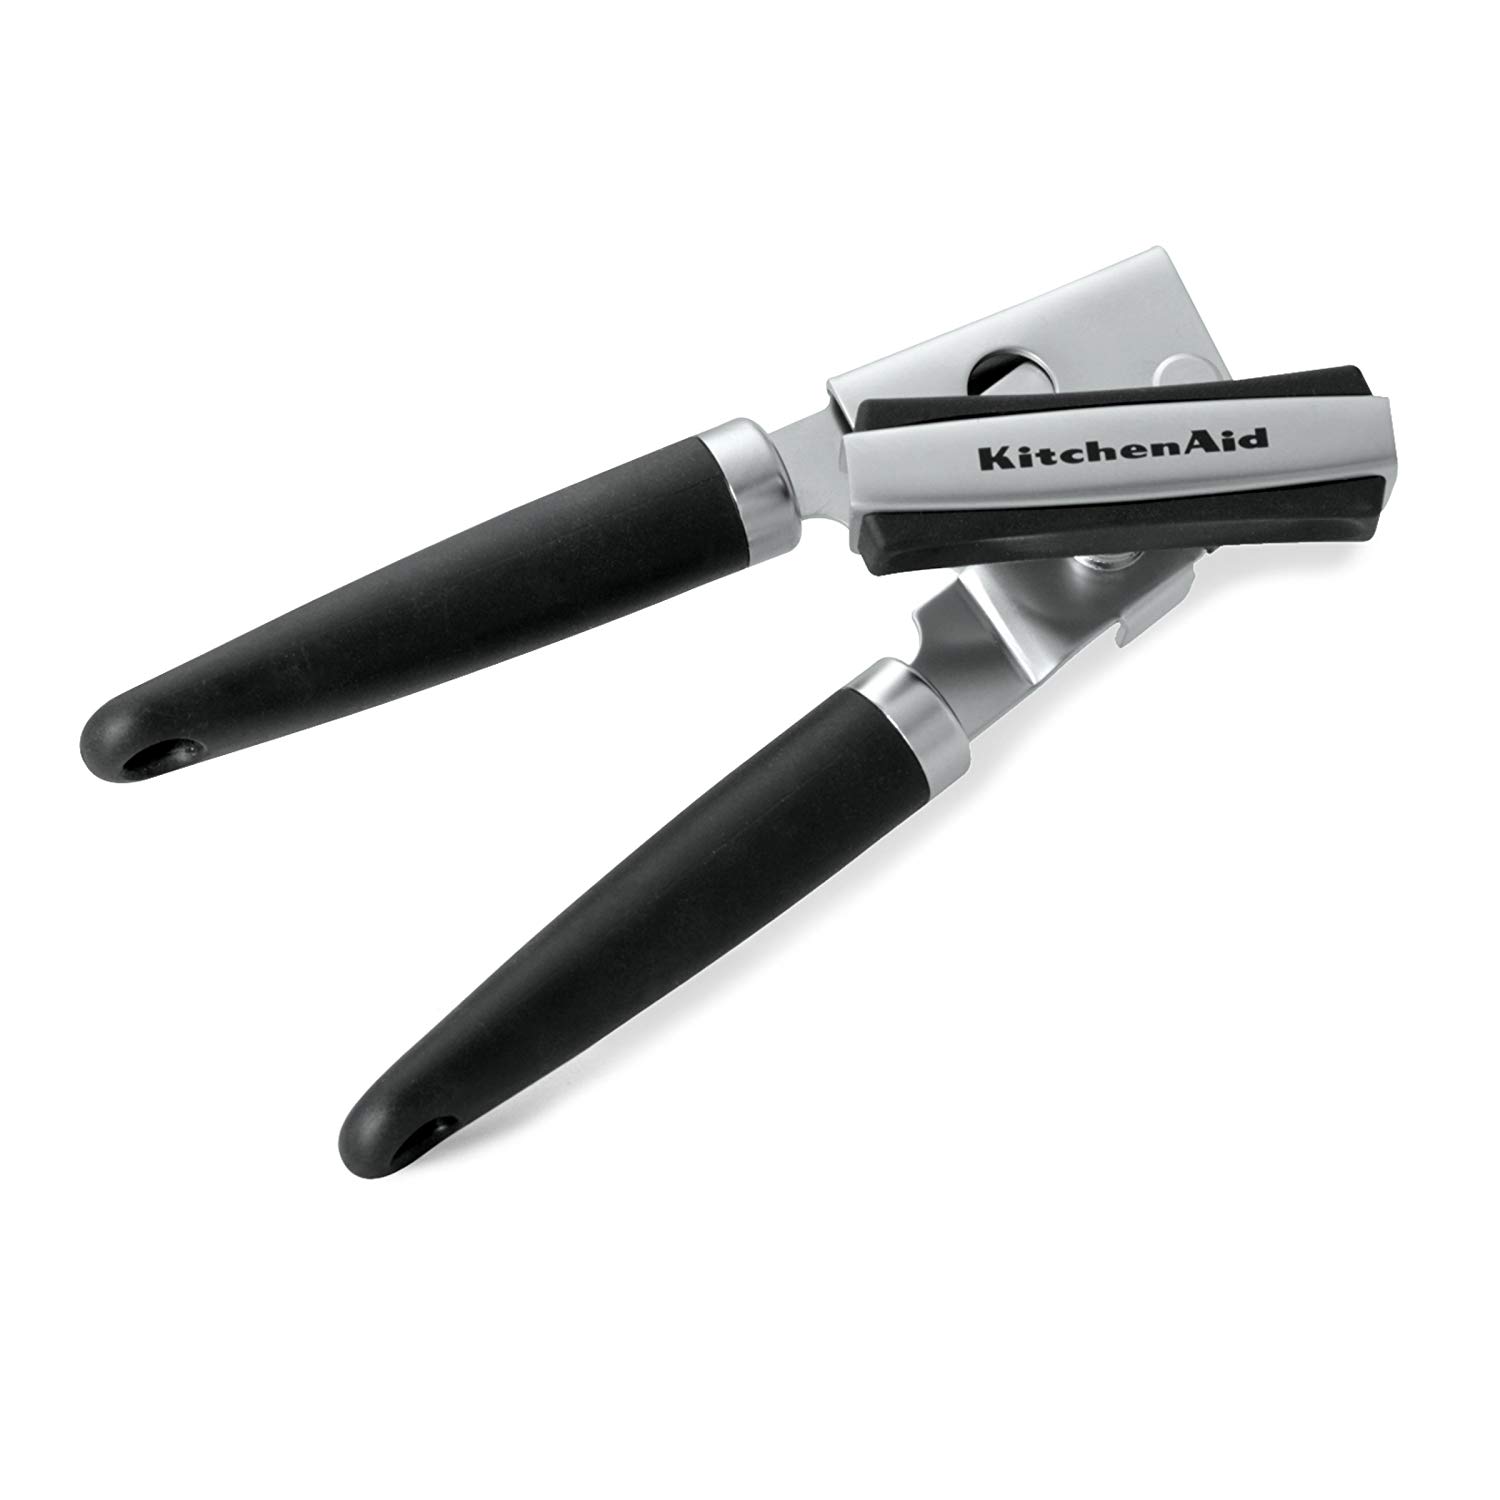 KitchenAid Manual Can Opener with Magnet